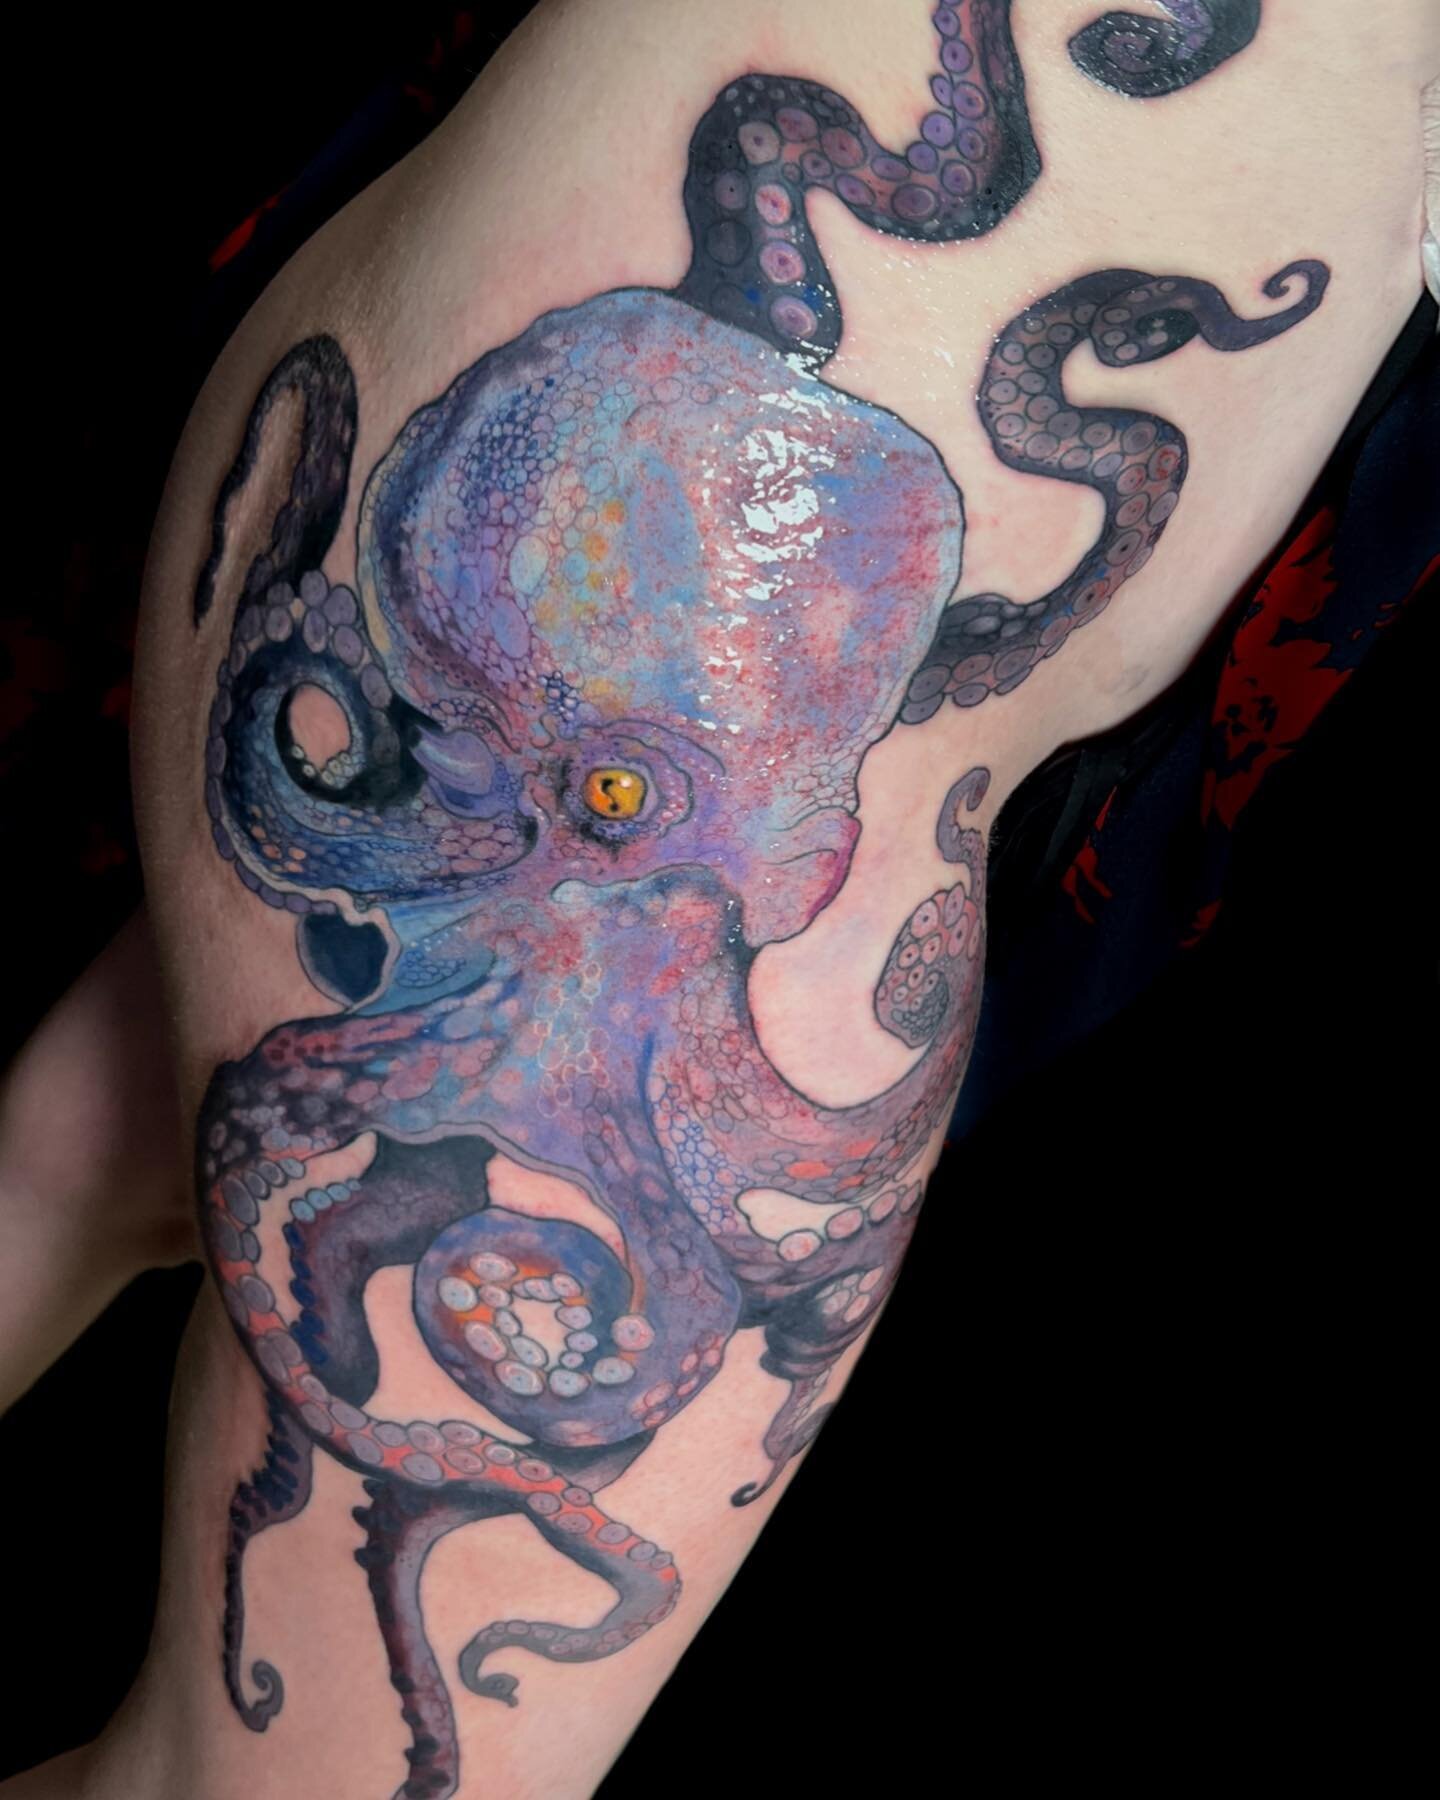 Almost full view of the octopus 🐙 
.
For appointments email aimeetattoos@gmaail.com 
.
@eternalink @barberdts